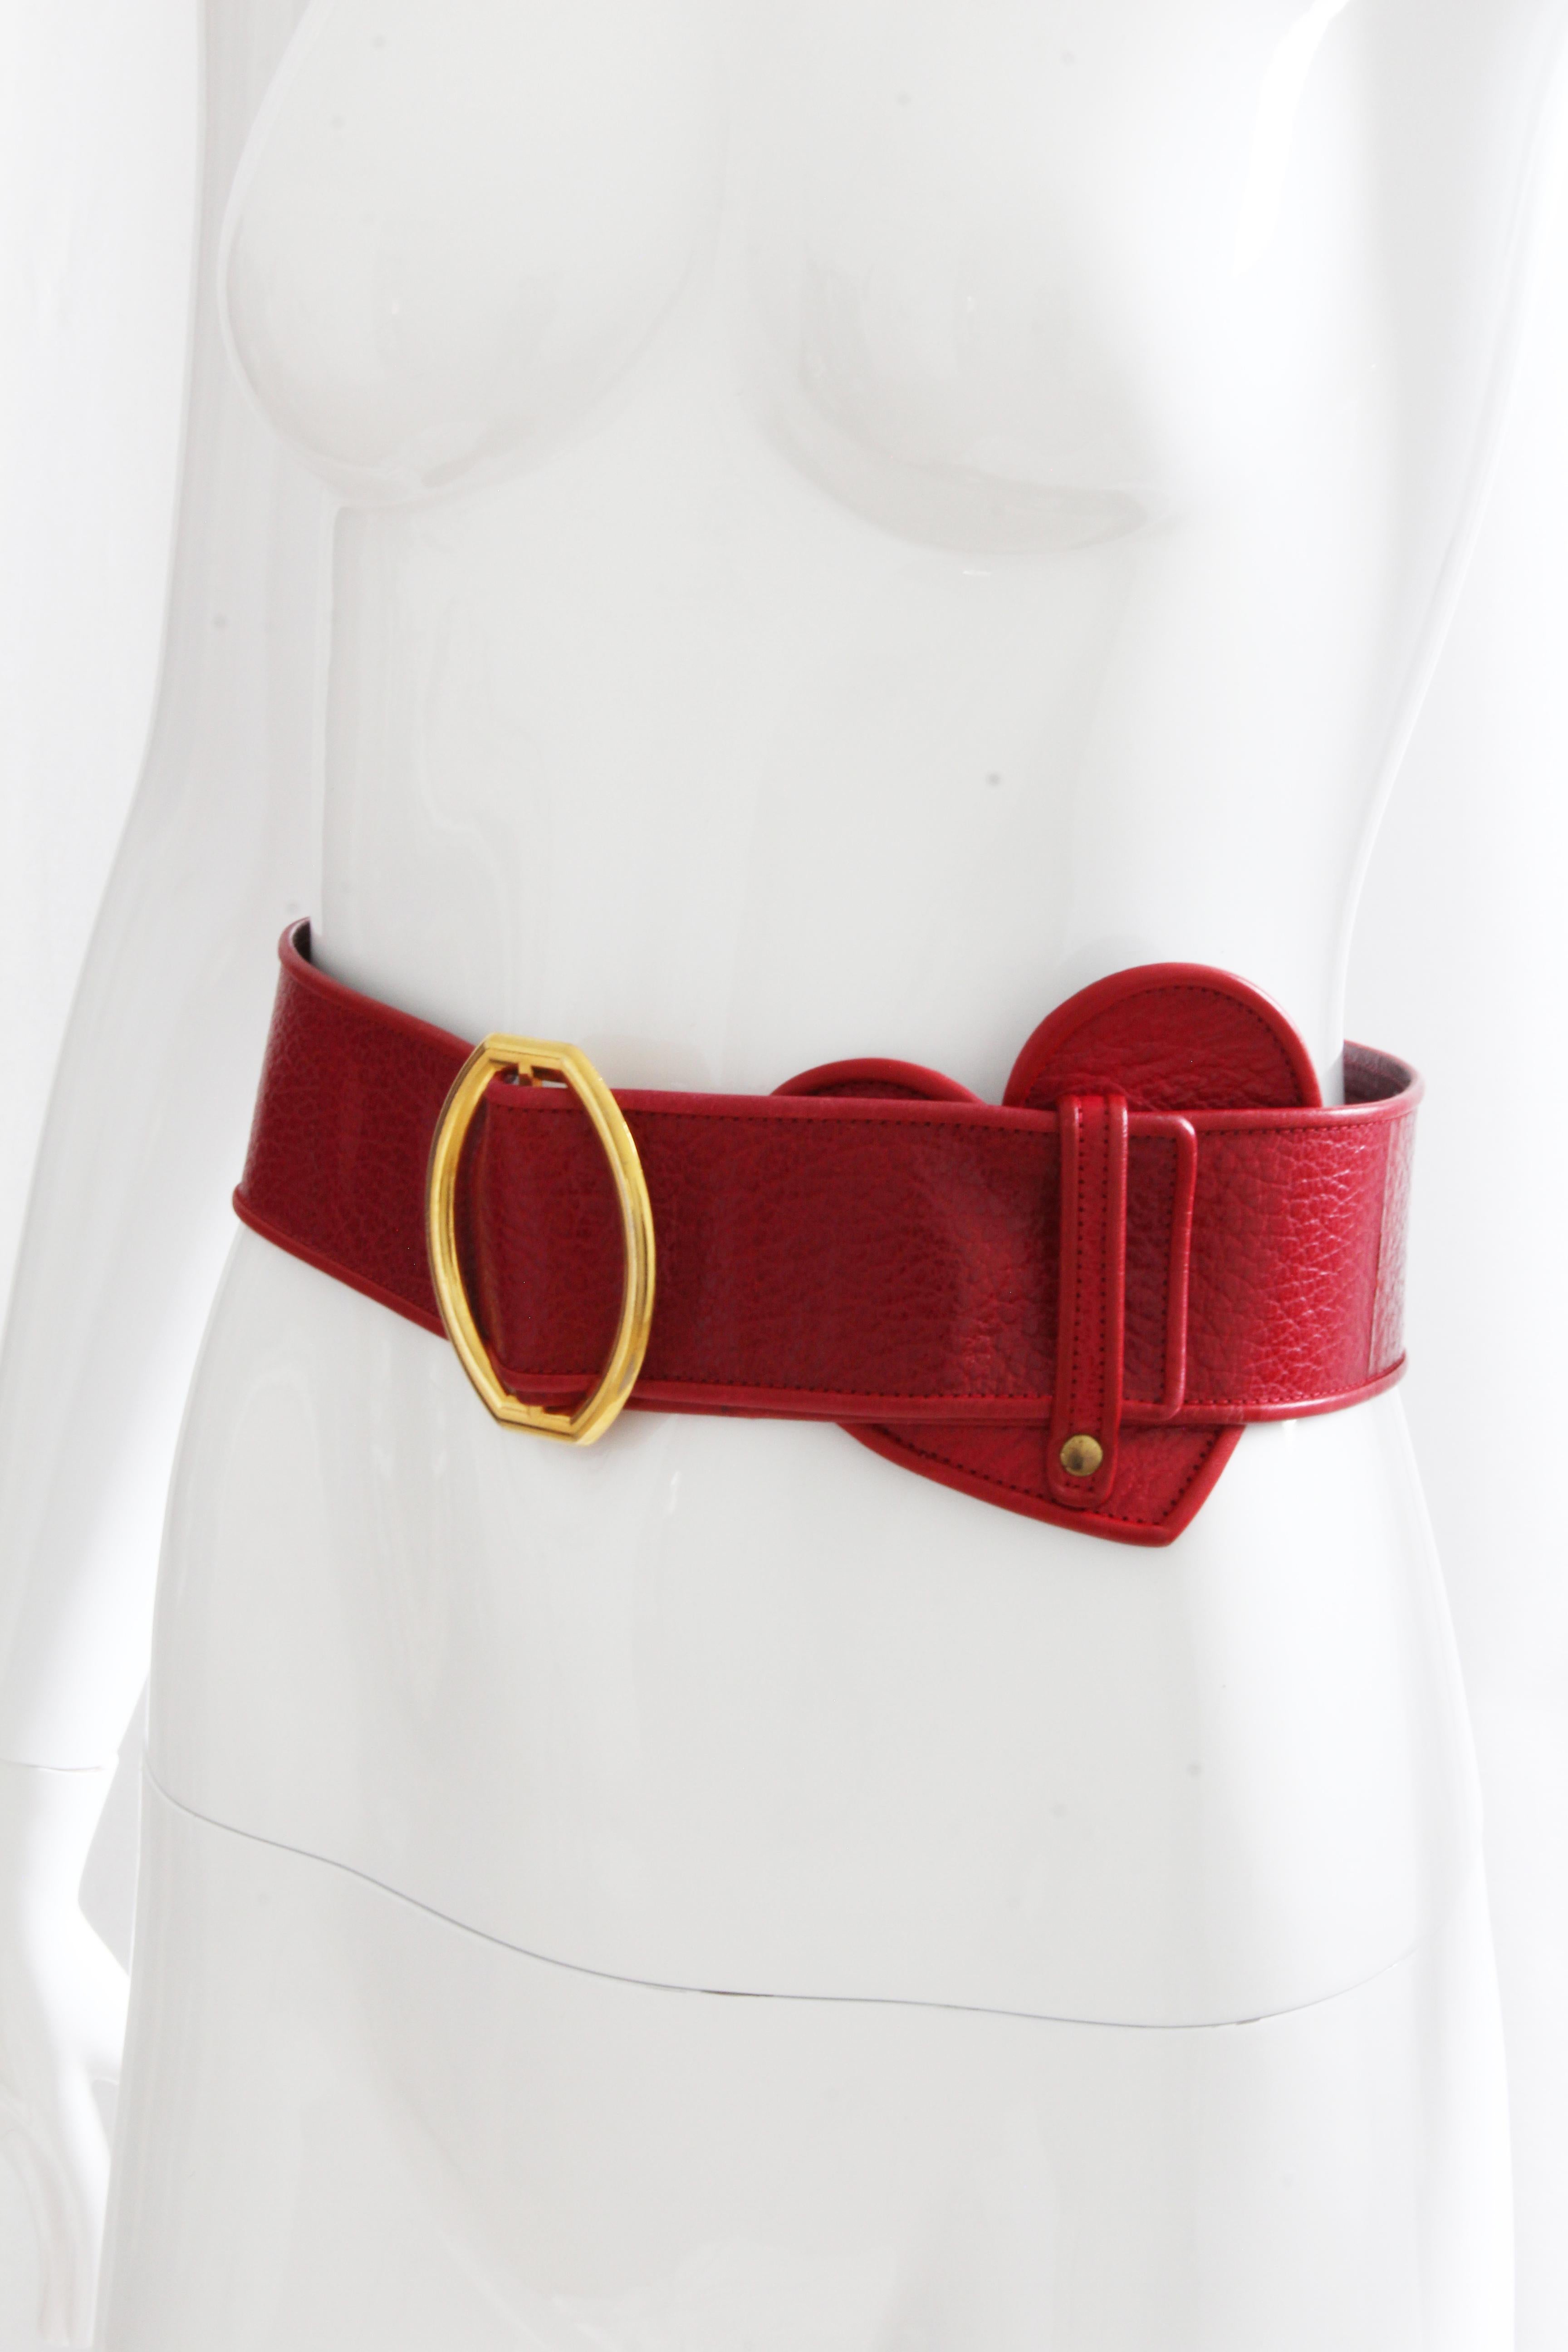 thin red leather belt